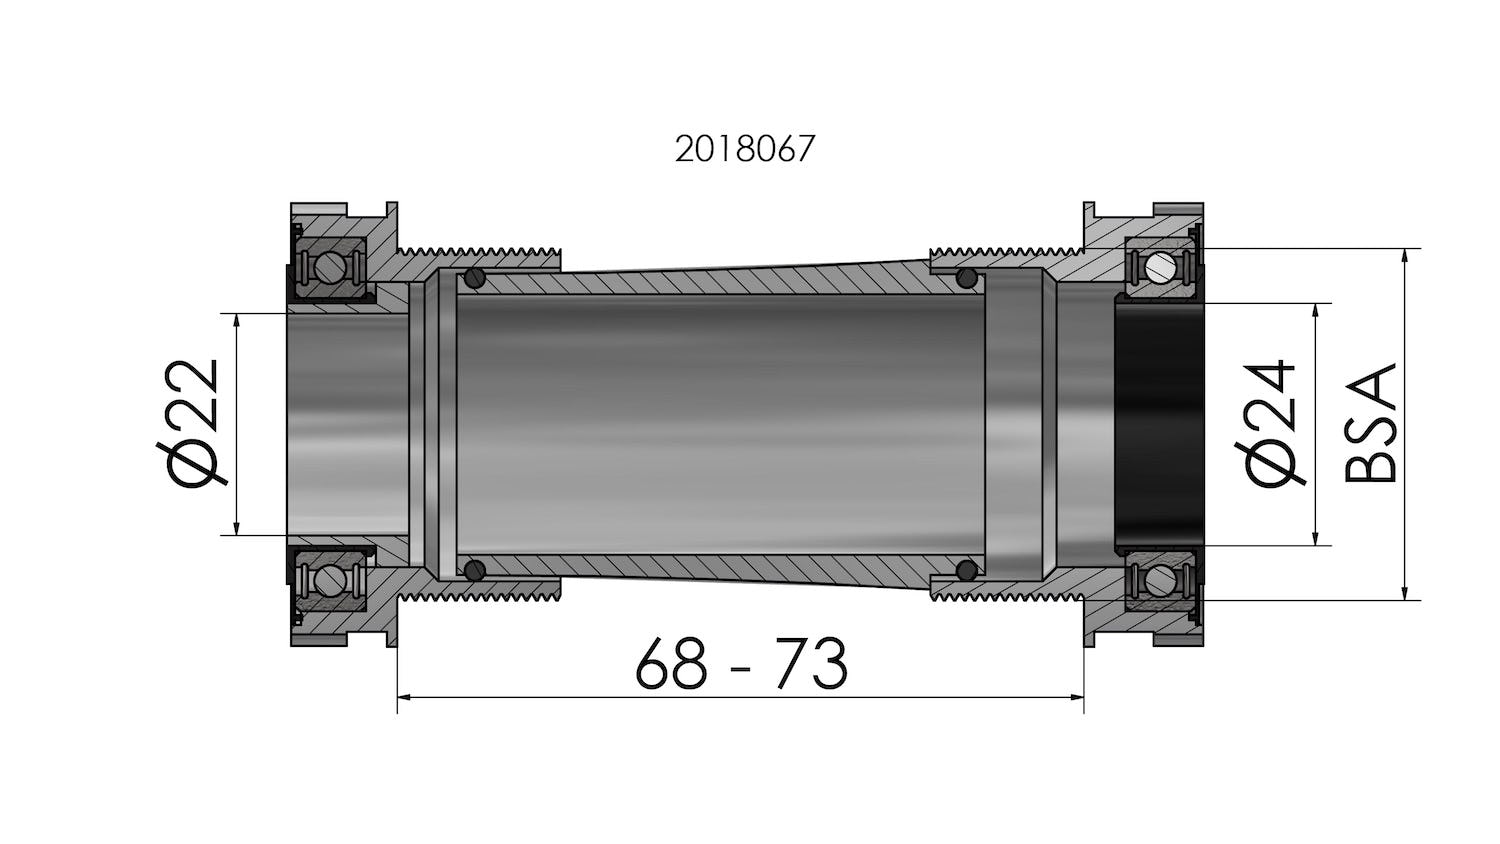 To choose the right bottom bracket, it is important to see all details and sizes. You will find a technical drawing of each model in the Elvedes catalogue pages 65 - 67.

